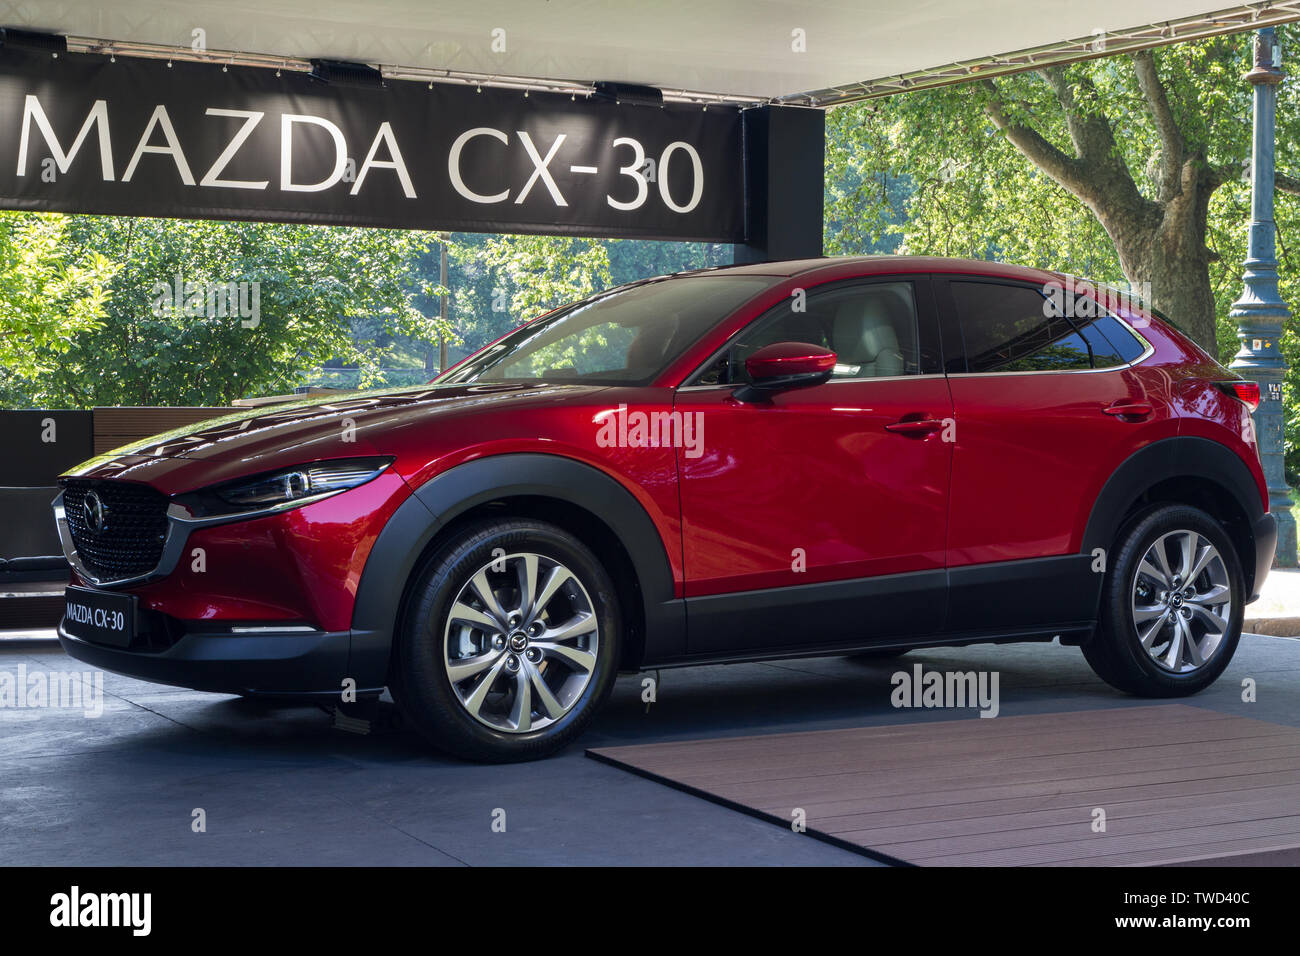 A red Mazda CX-30. 2019 edition of Parco Valentino car show hosts cars by many brands and car designers in Valentino Park in Torino, Italy. Stock Photo